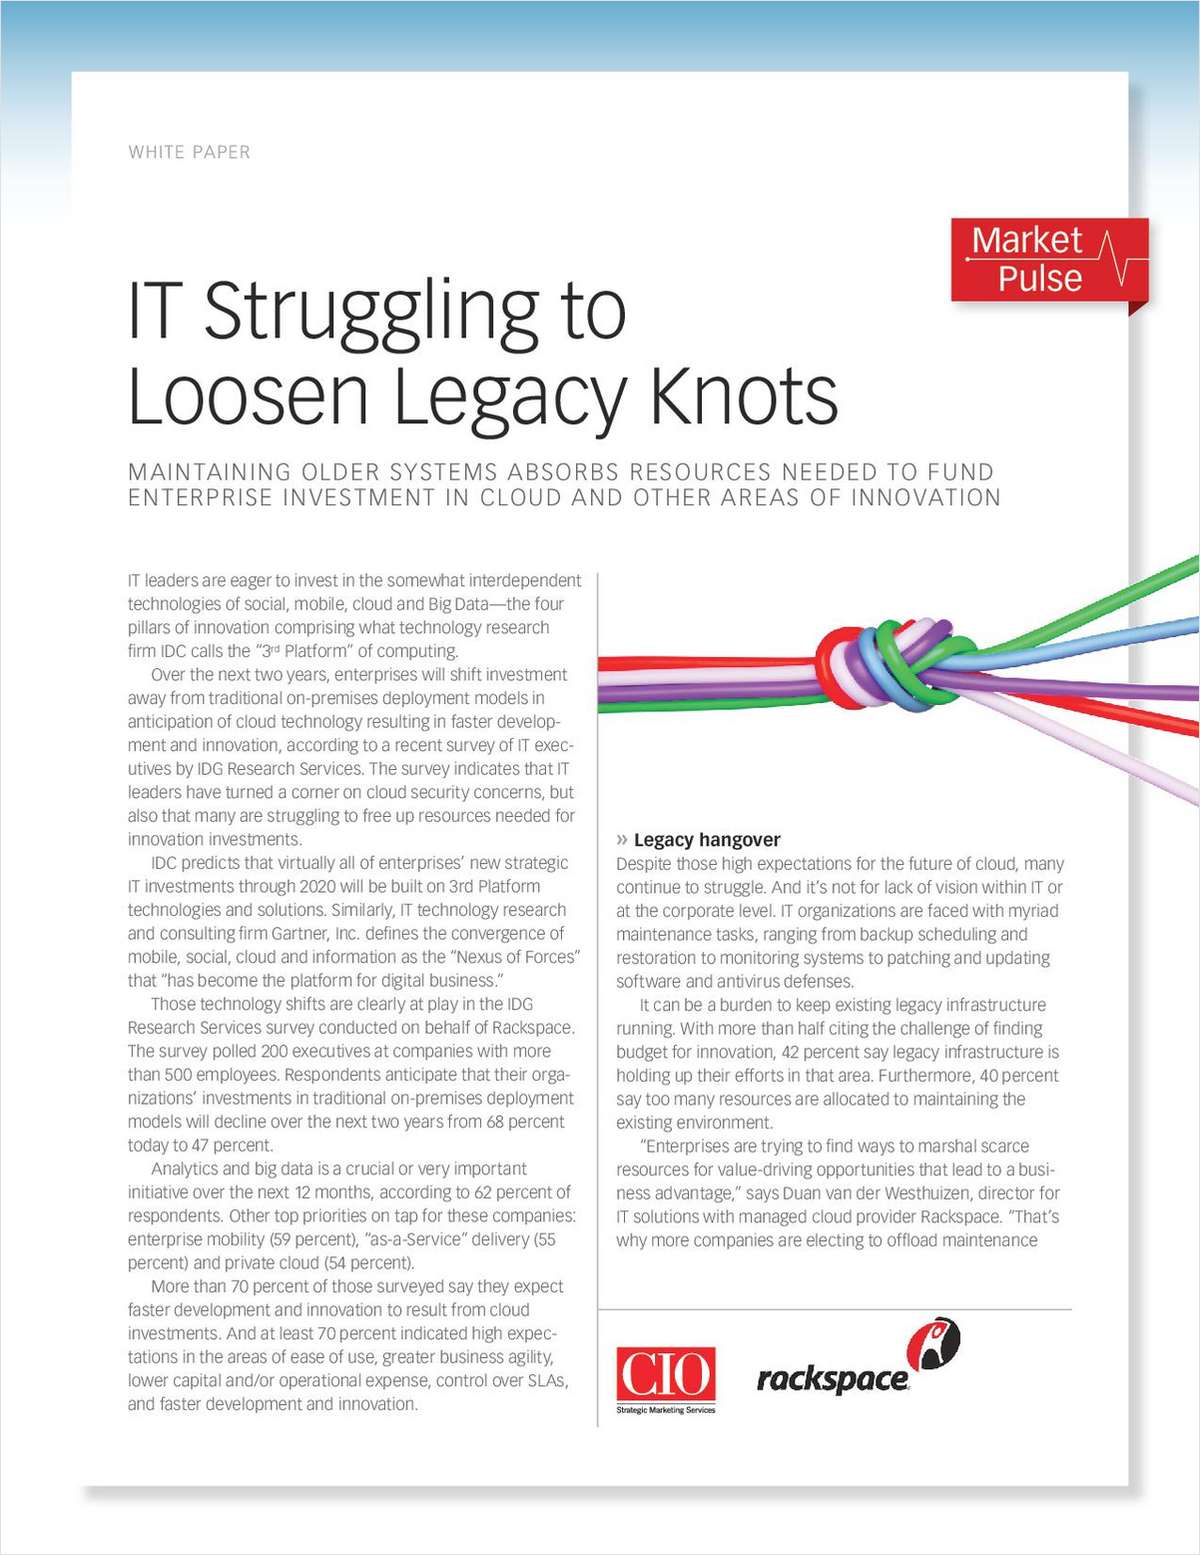 Is Your Legacy IT Choking Innovation?